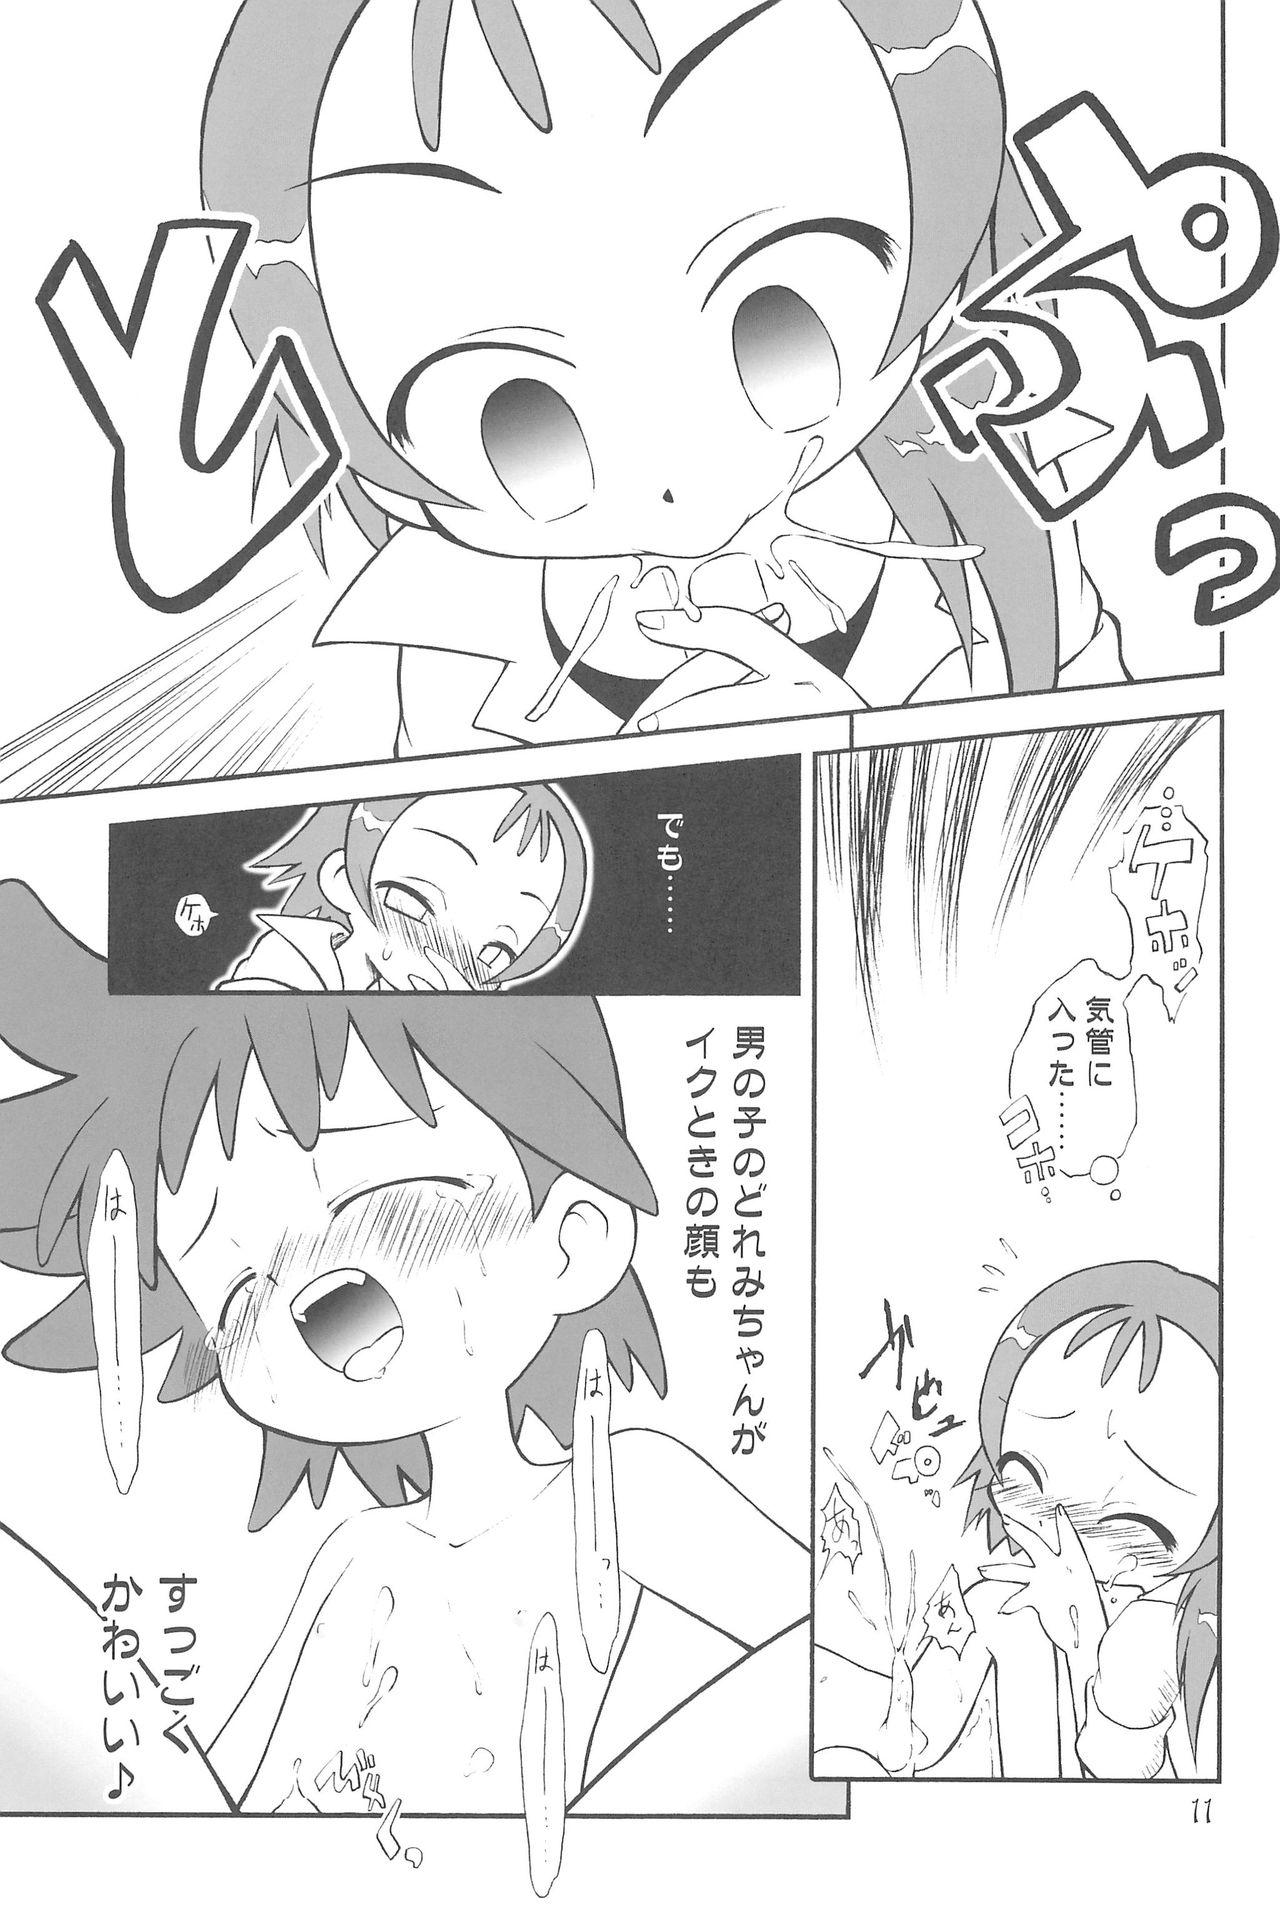 Women Fucking Witch’s Song Plus - Ojamajo doremi Tease - Page 11